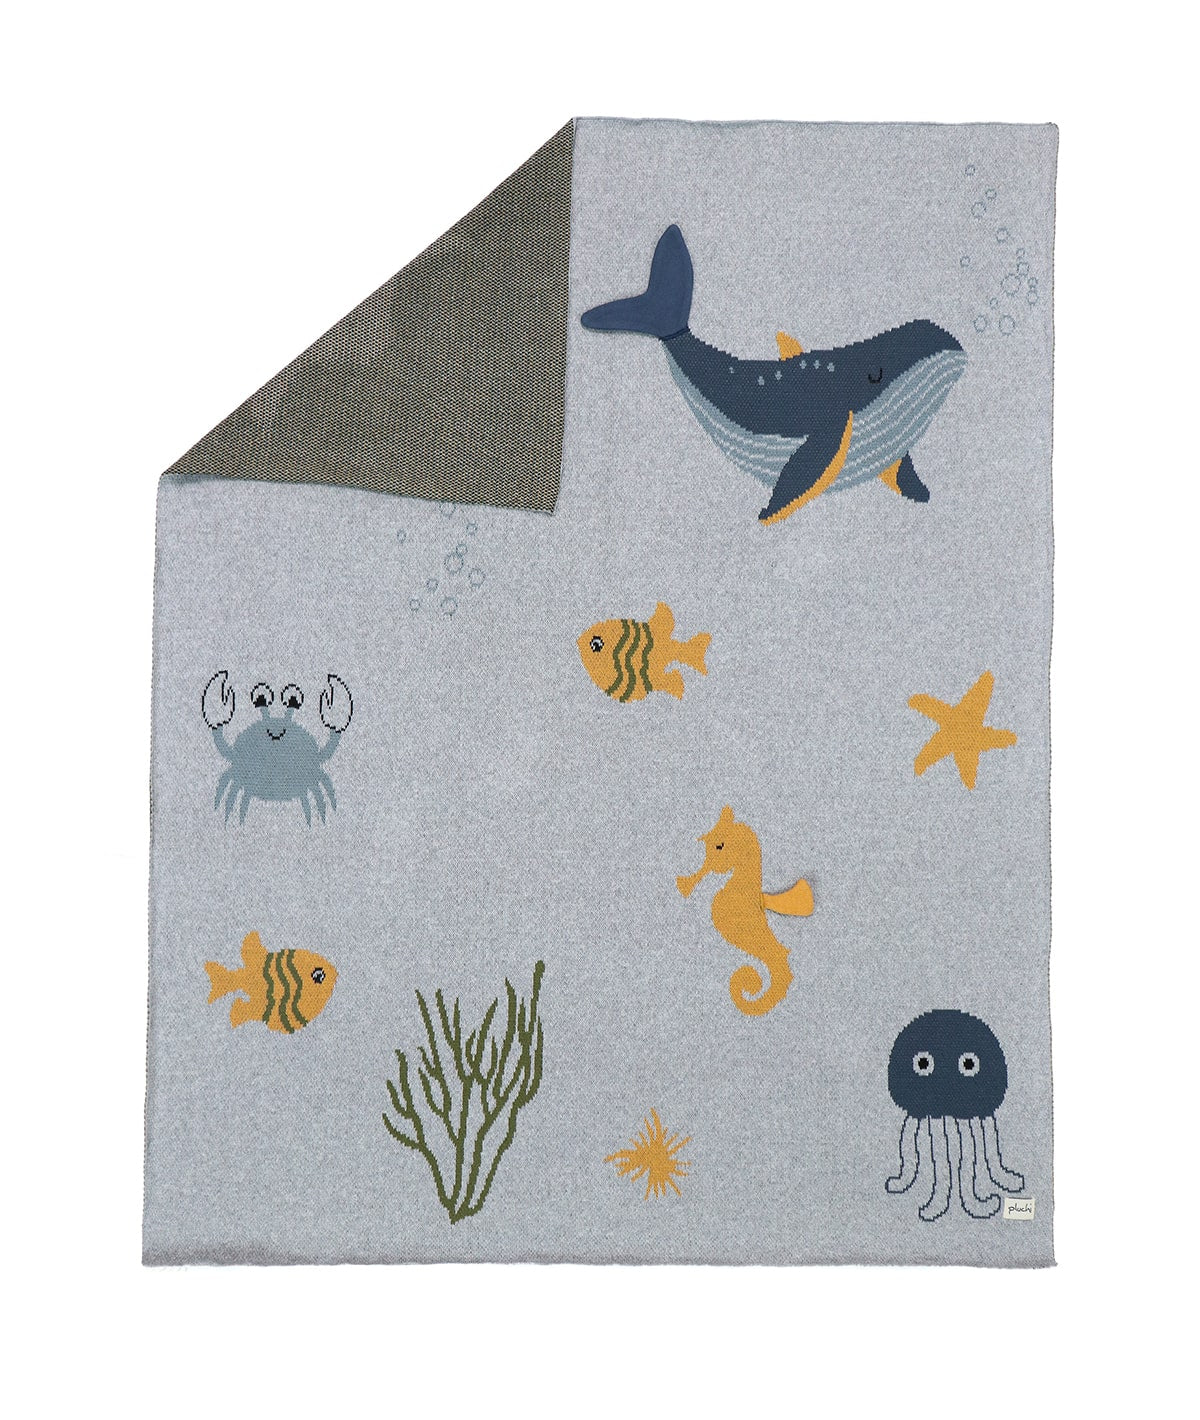 Wonders of the Sea- Soft Grey Melange & Multi Color Cotton Knitted Ac Blanket For Baby / Infant / New Born For Use In All Seasons with Applique Work